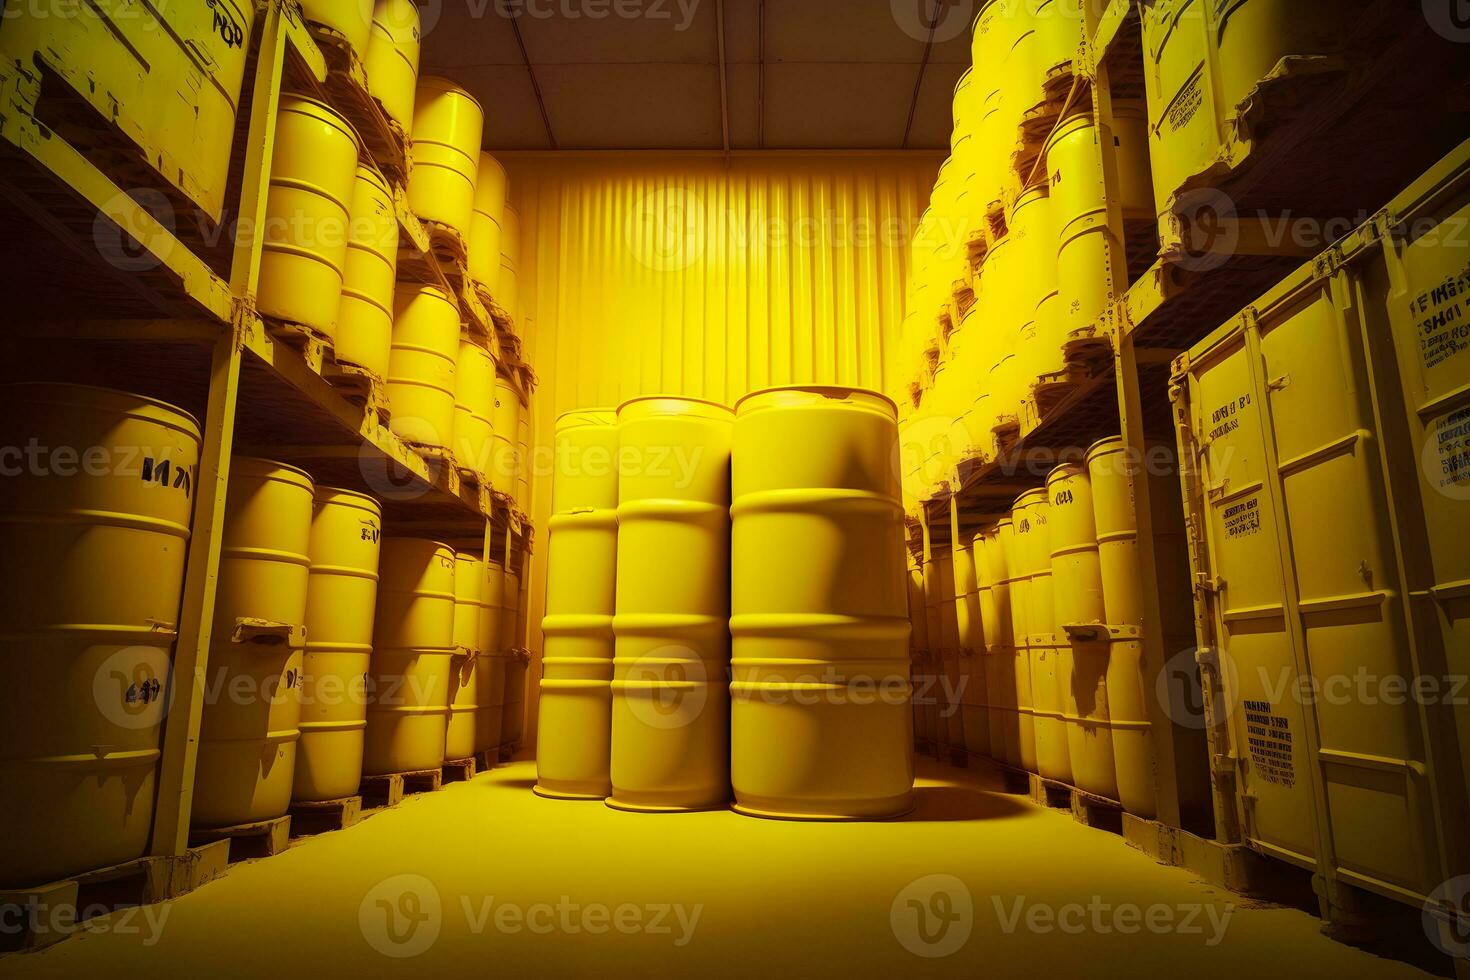 Radioactive waste in barrels, nuclear waste repository. Neural network generated art photo